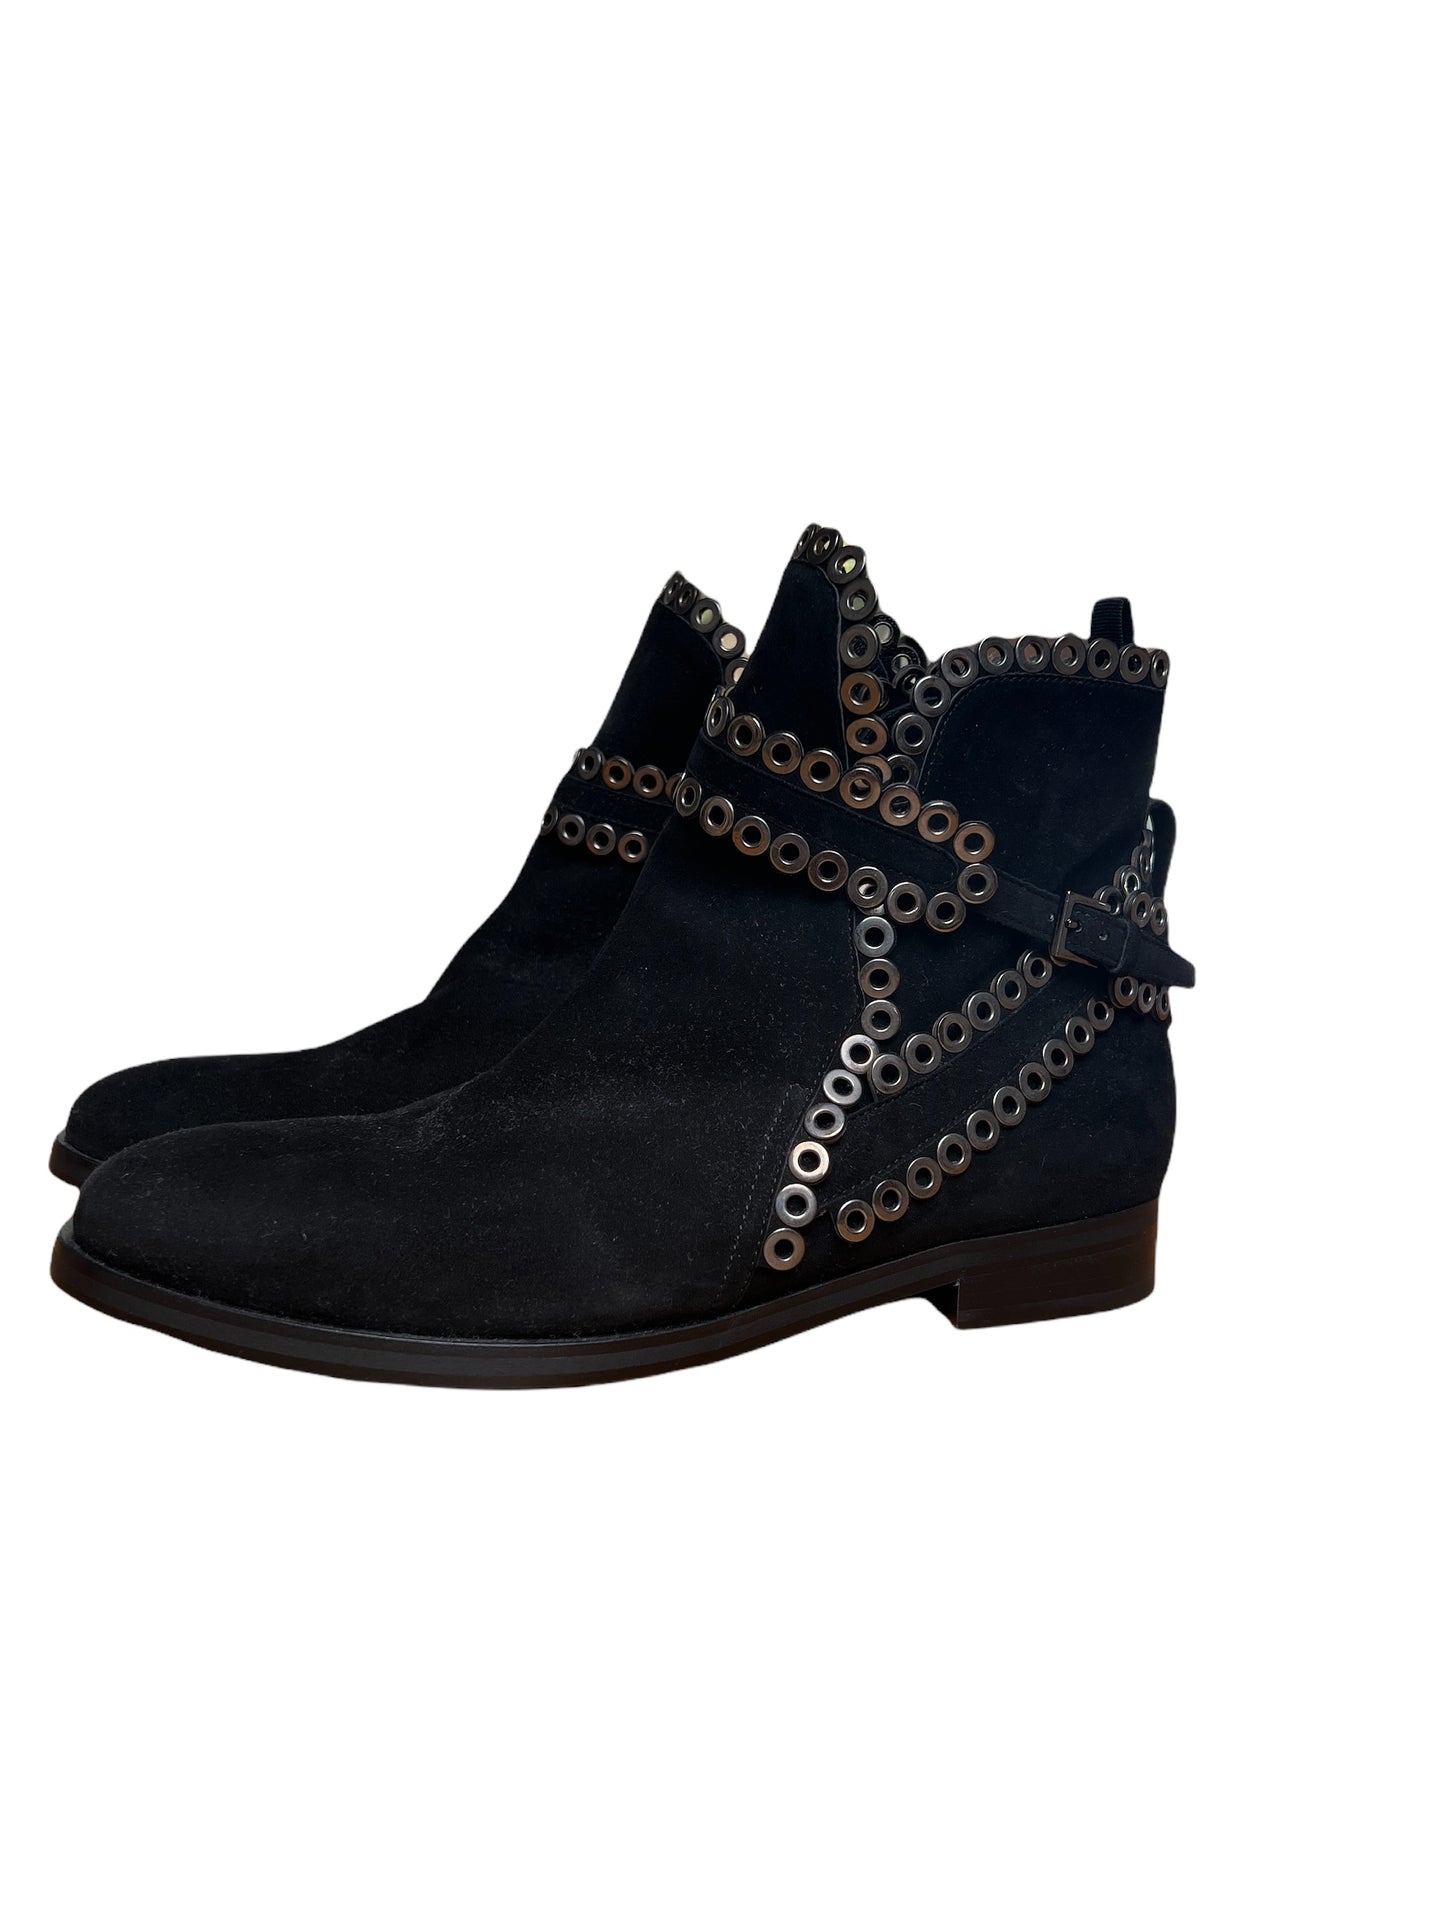 Eyelet Low Boots - 10